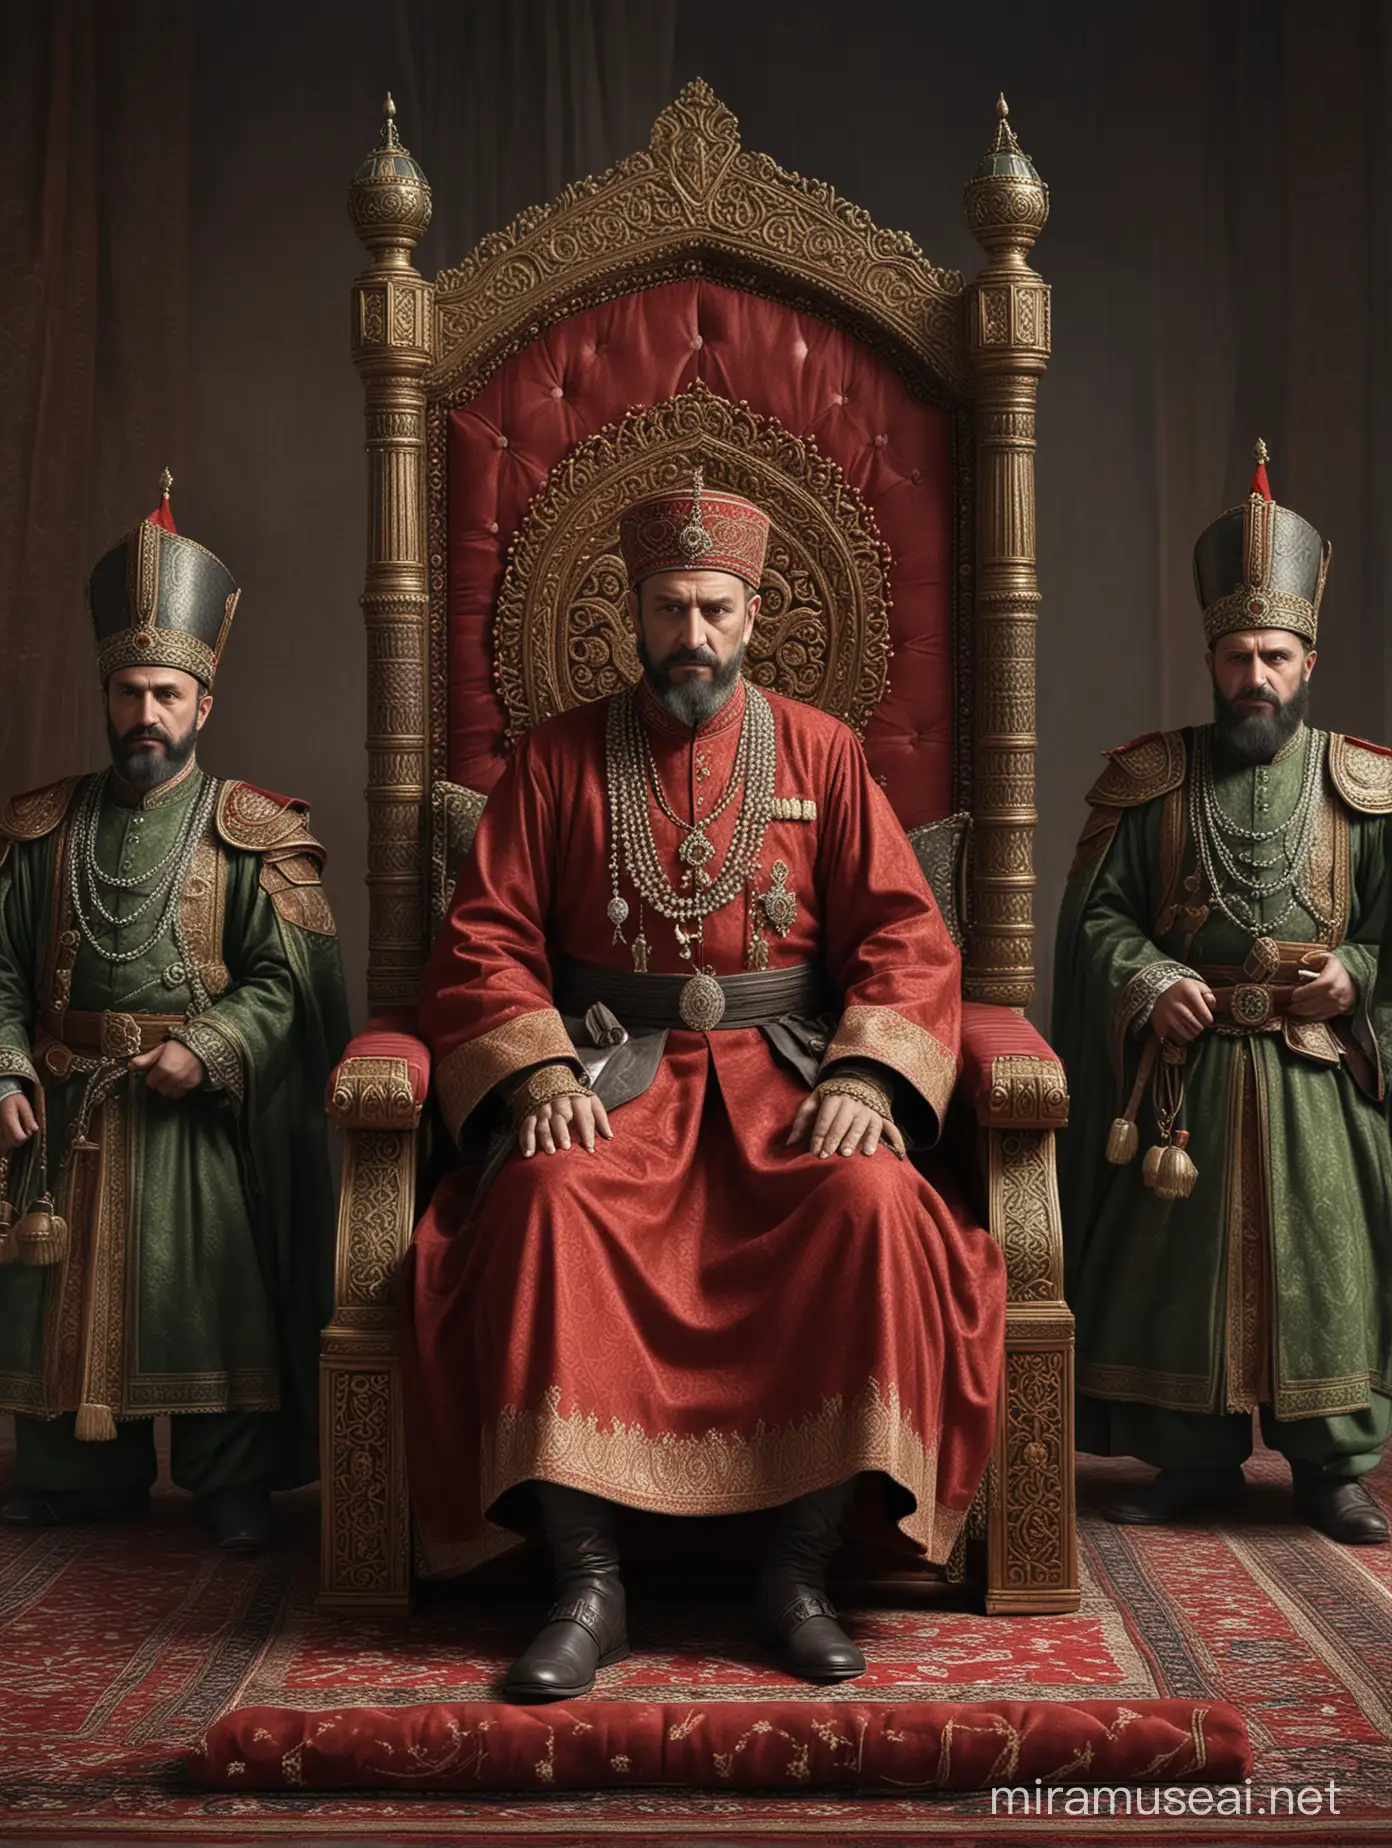 Hyper Realistic Portrait of Ottoman Sultan Mehmed IV on Throne with Guards